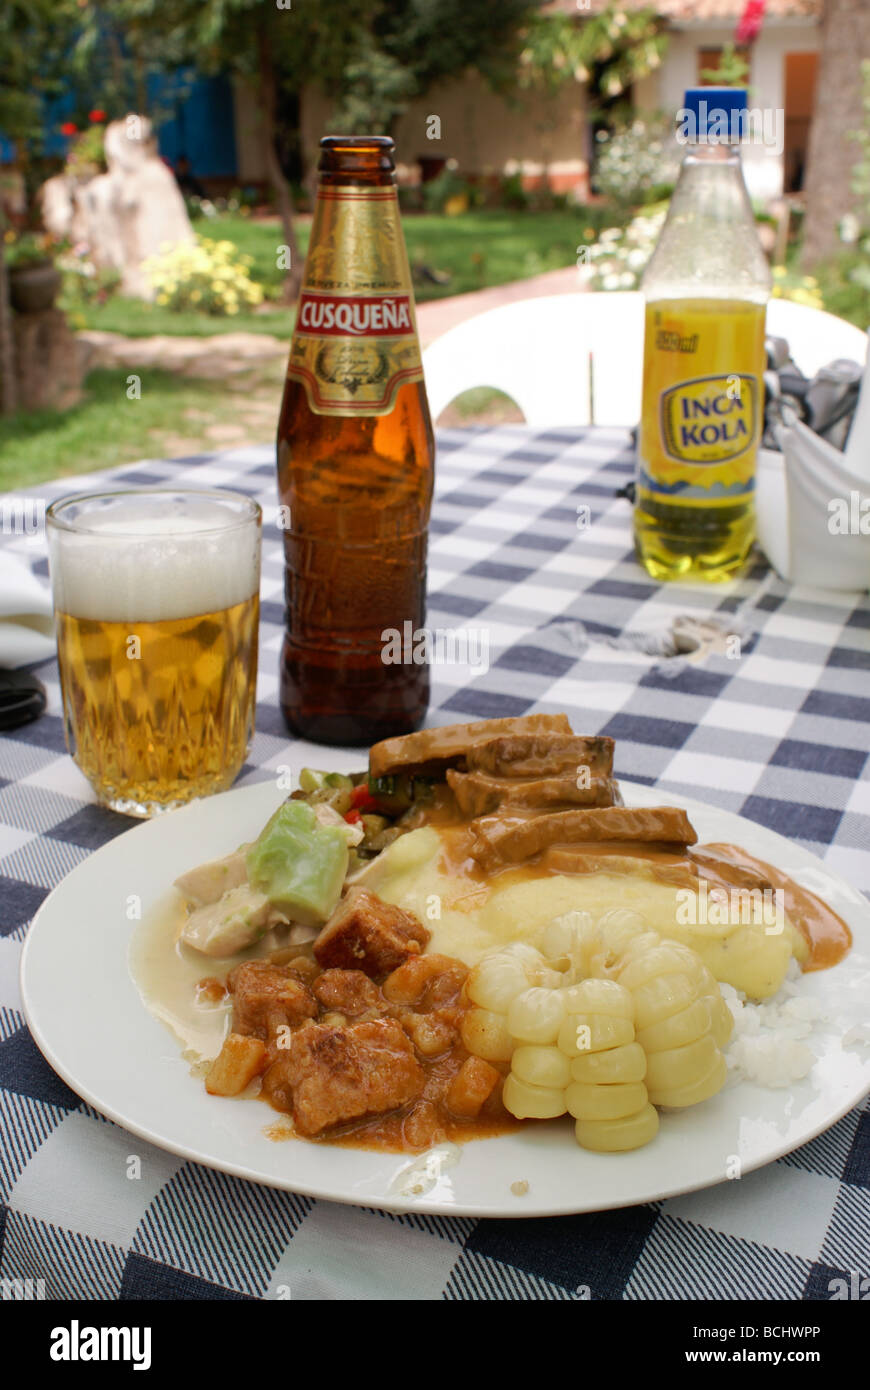 Typical Peruvian food and drinks Stock Photo